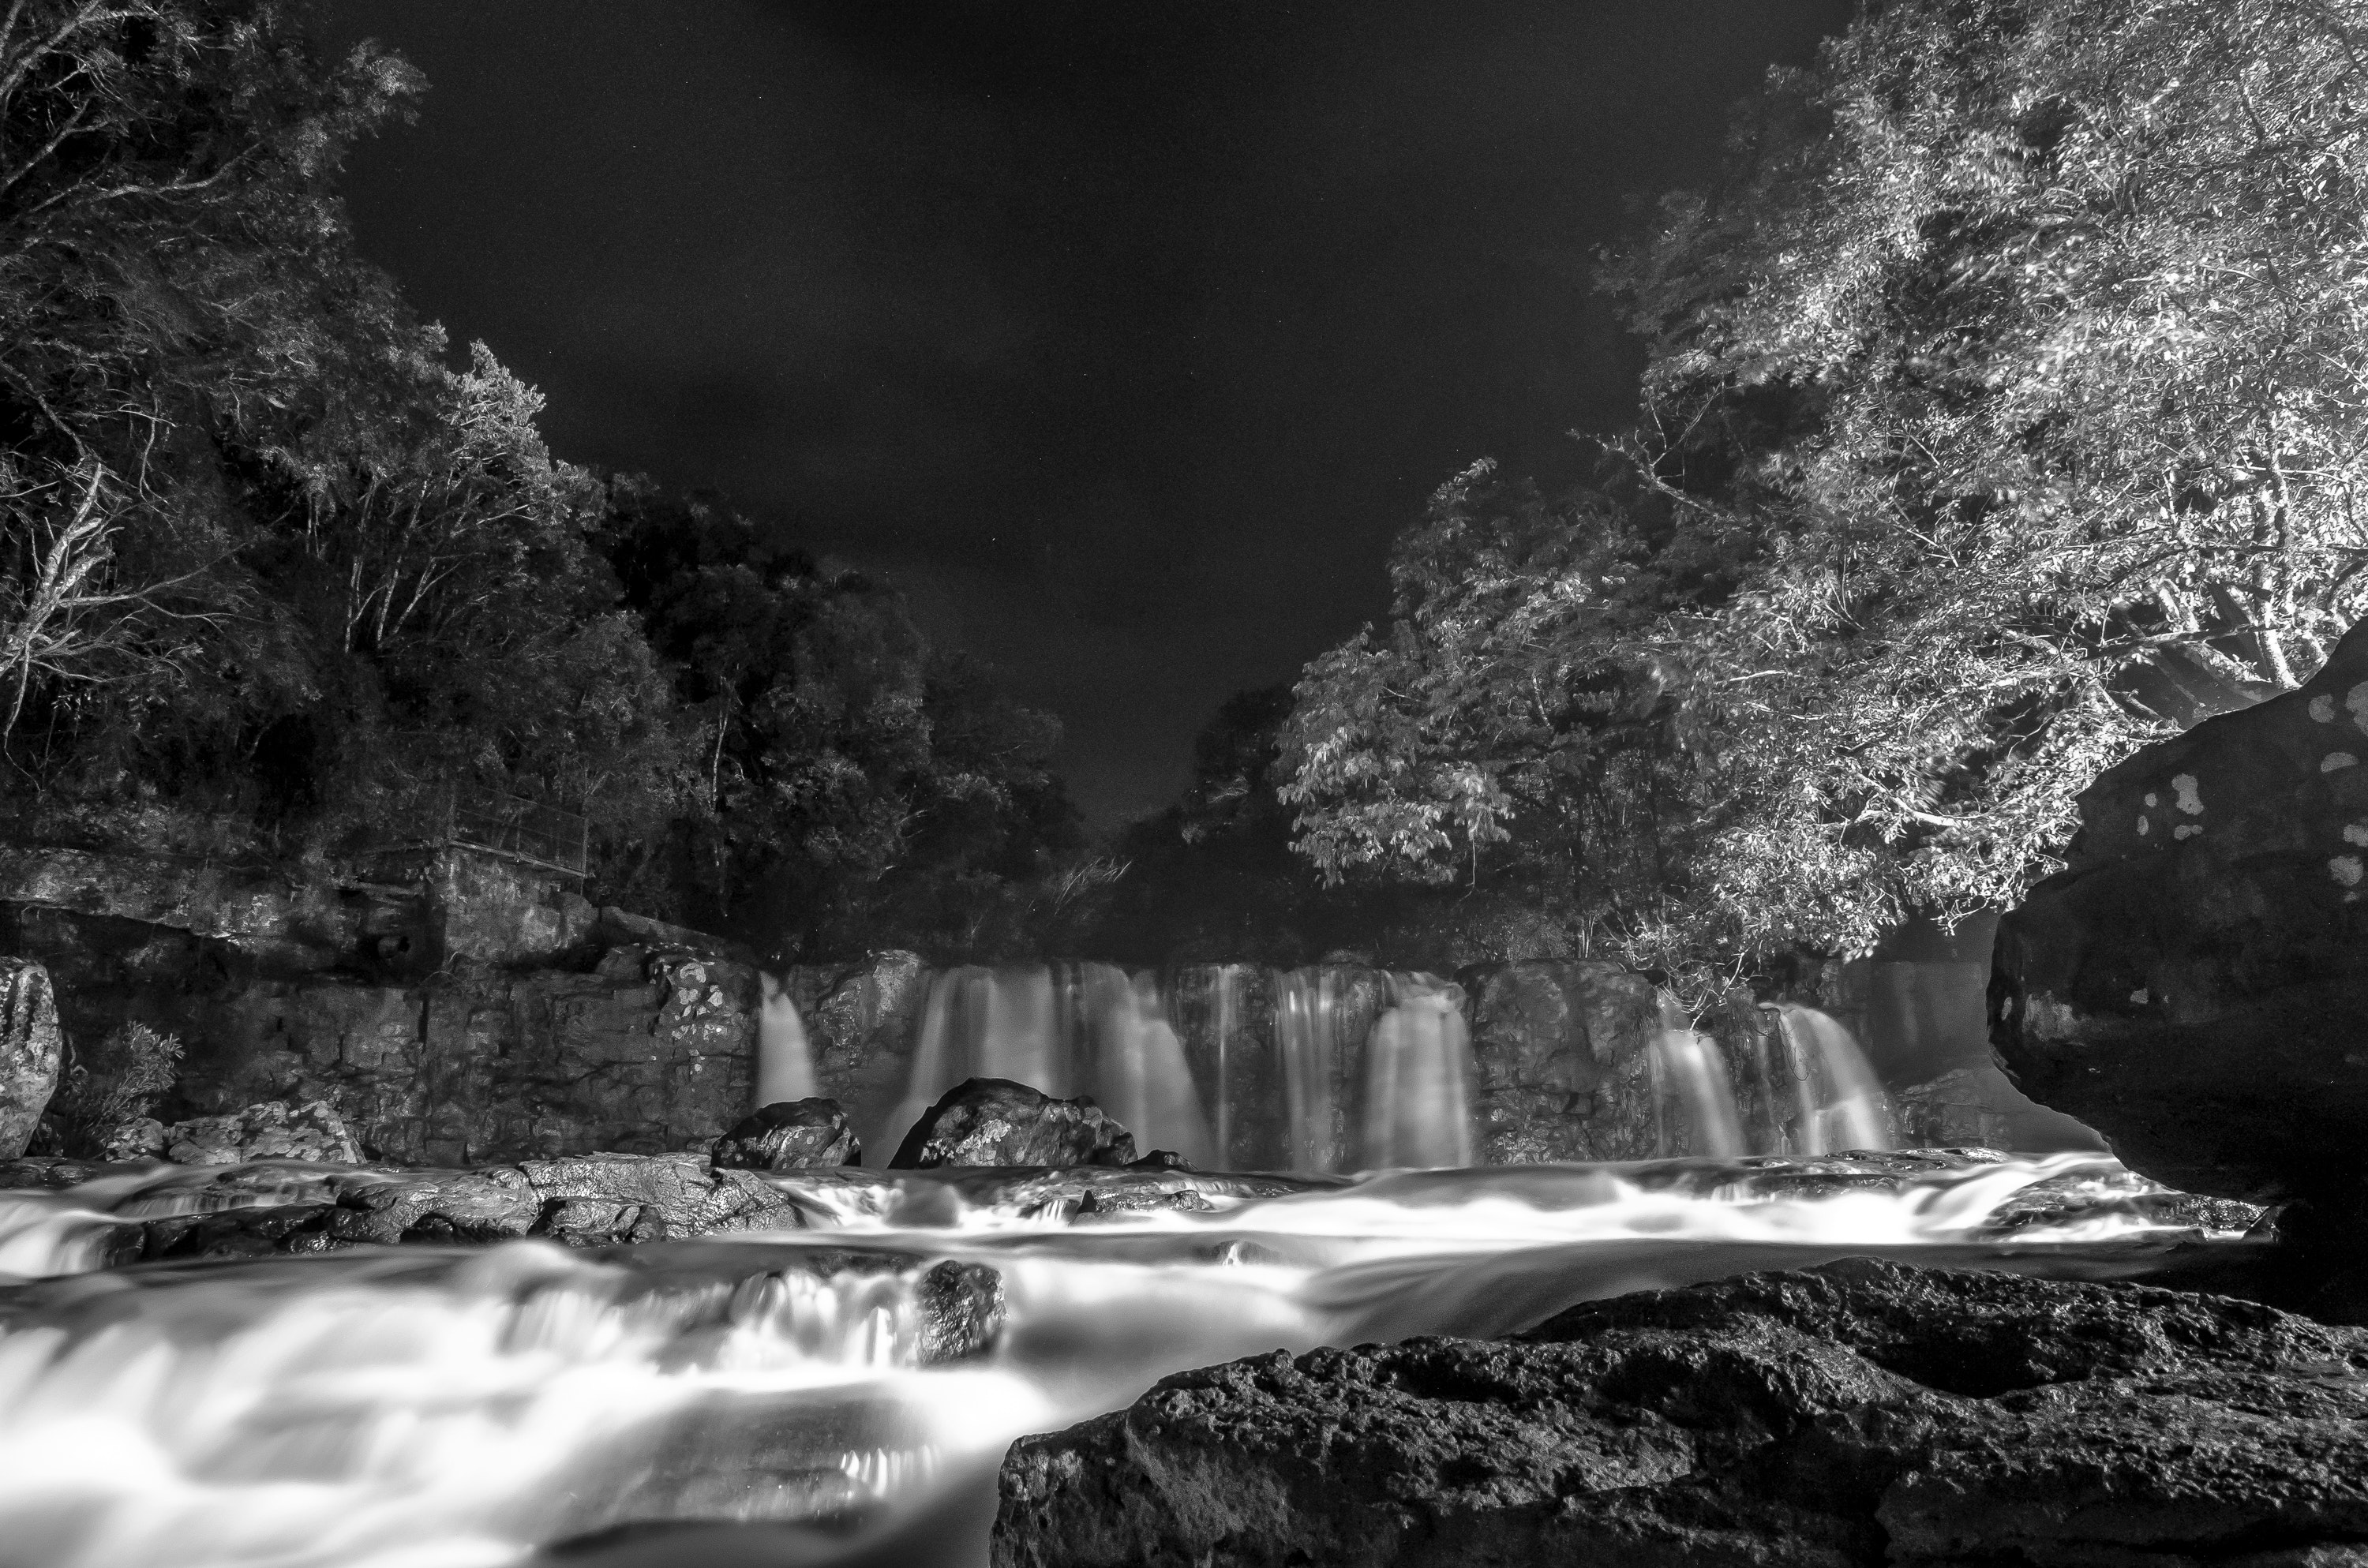 Greyscale photo of waterfall during nighttime